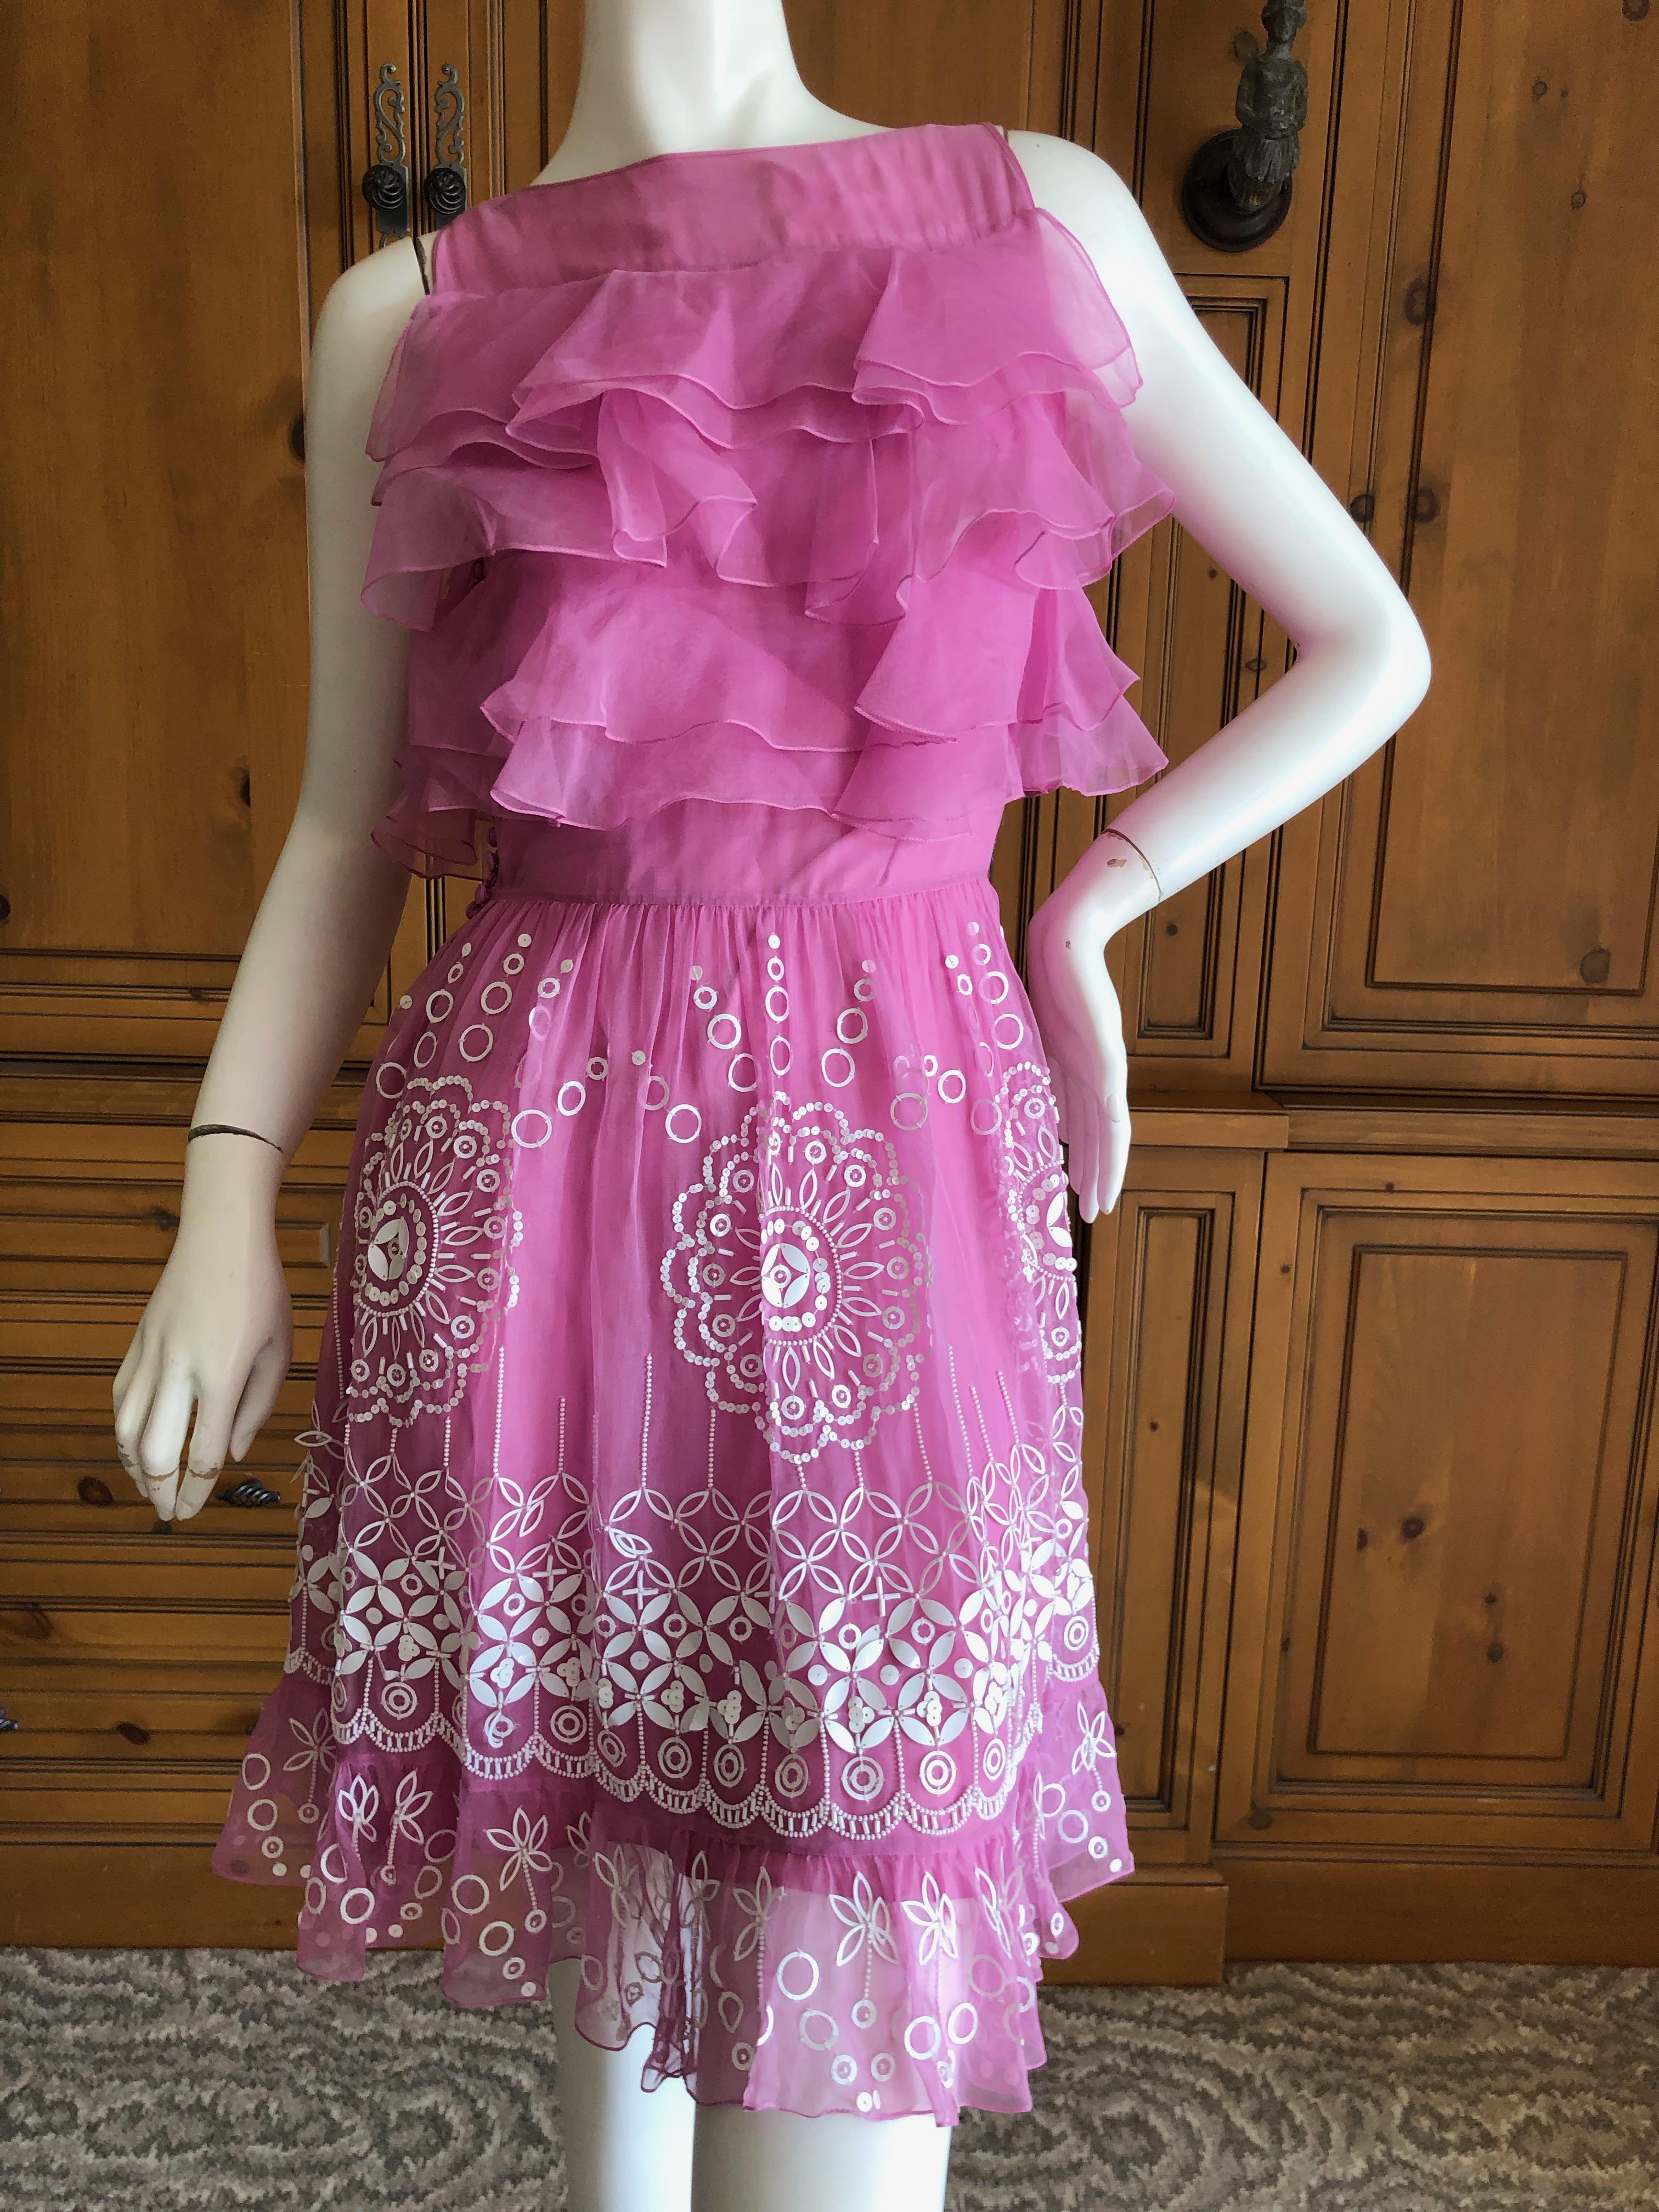 Christian Dior by John Galliano Pink Silk Dress with White Embellishments.
This is so pretty, please use the zoom to see the details.
The ornamentation is amazing, each sequin hand sewn in a folkloric pattern.
 Size 38
Bust 36